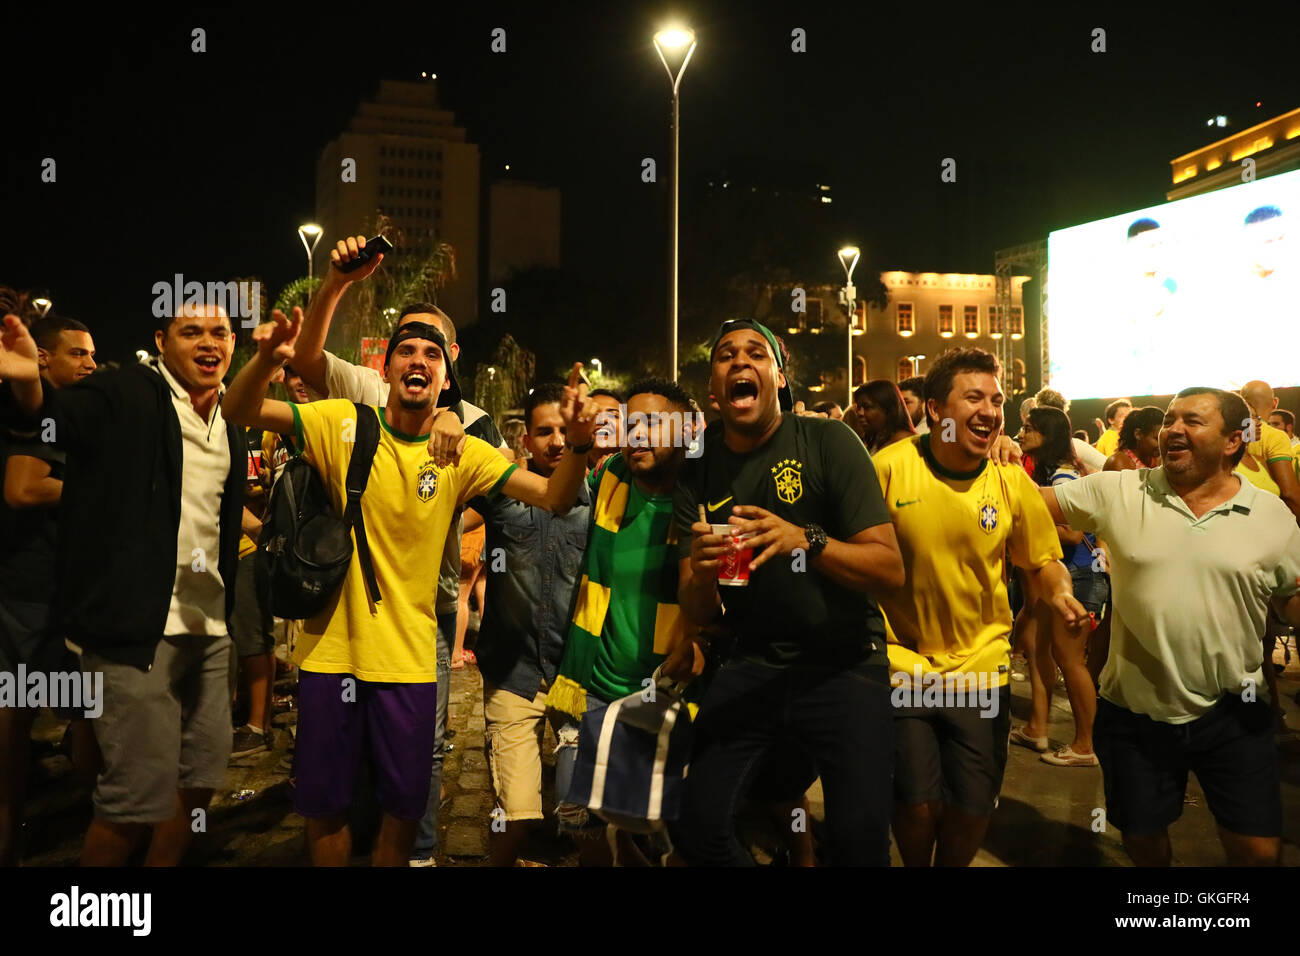 Rio De Janeiro, Brazil. 20th August, 2016. The Olympic games begin to draw to a close. Brazil fans celebrate a gold medal in the Olympic Football Tournament as Brazil beat Germany 2-1. Credit:  Yohei Osada/AFLO SPORT/Alamy Live News Stock Photo